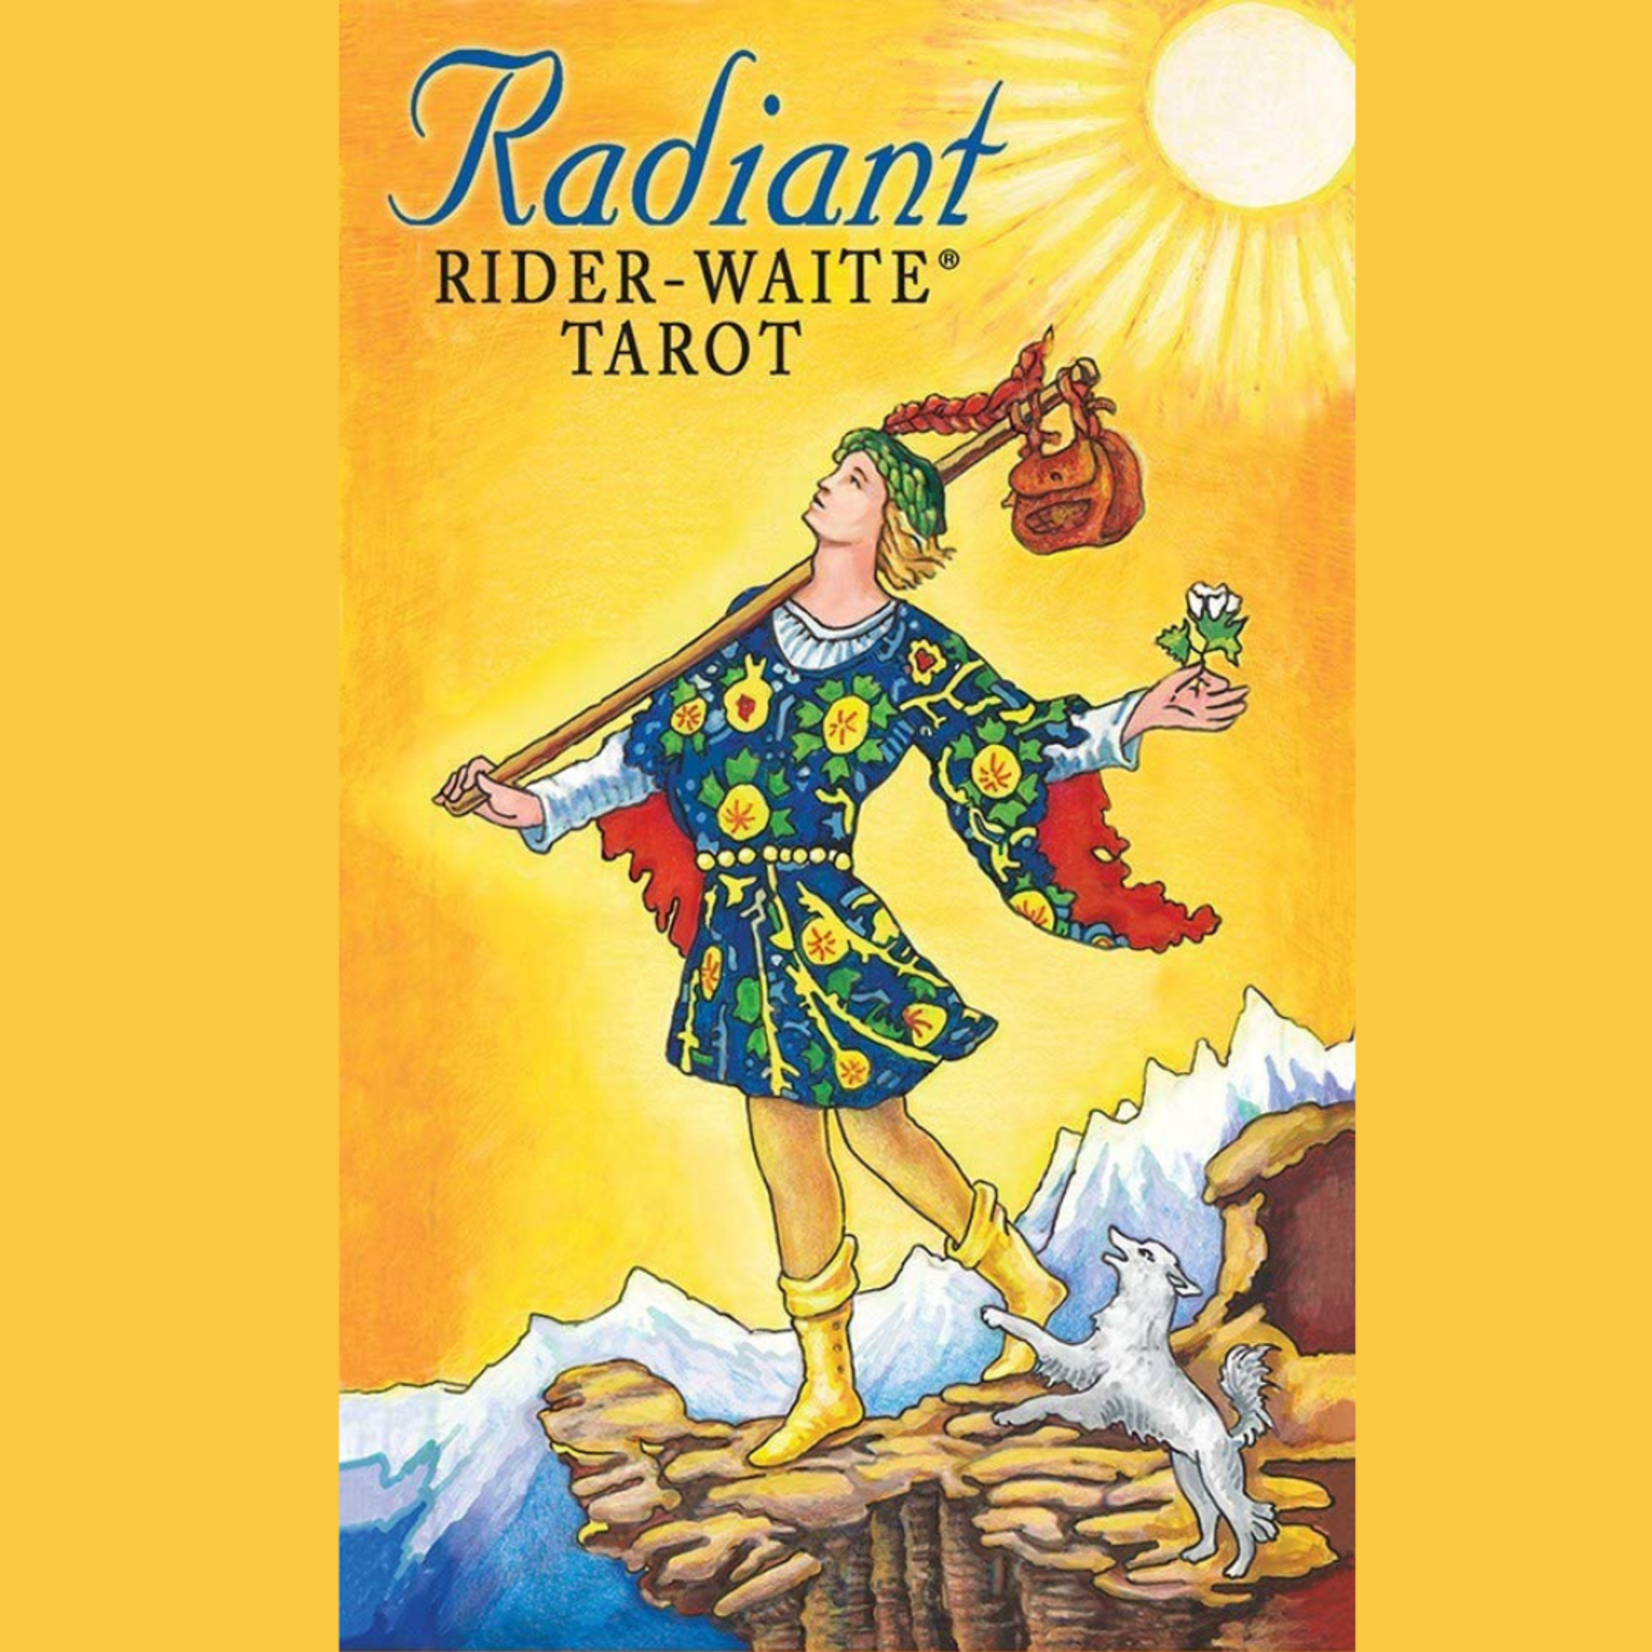 Radiant Rider-Waite Tarot Deck with Instruction Booklet